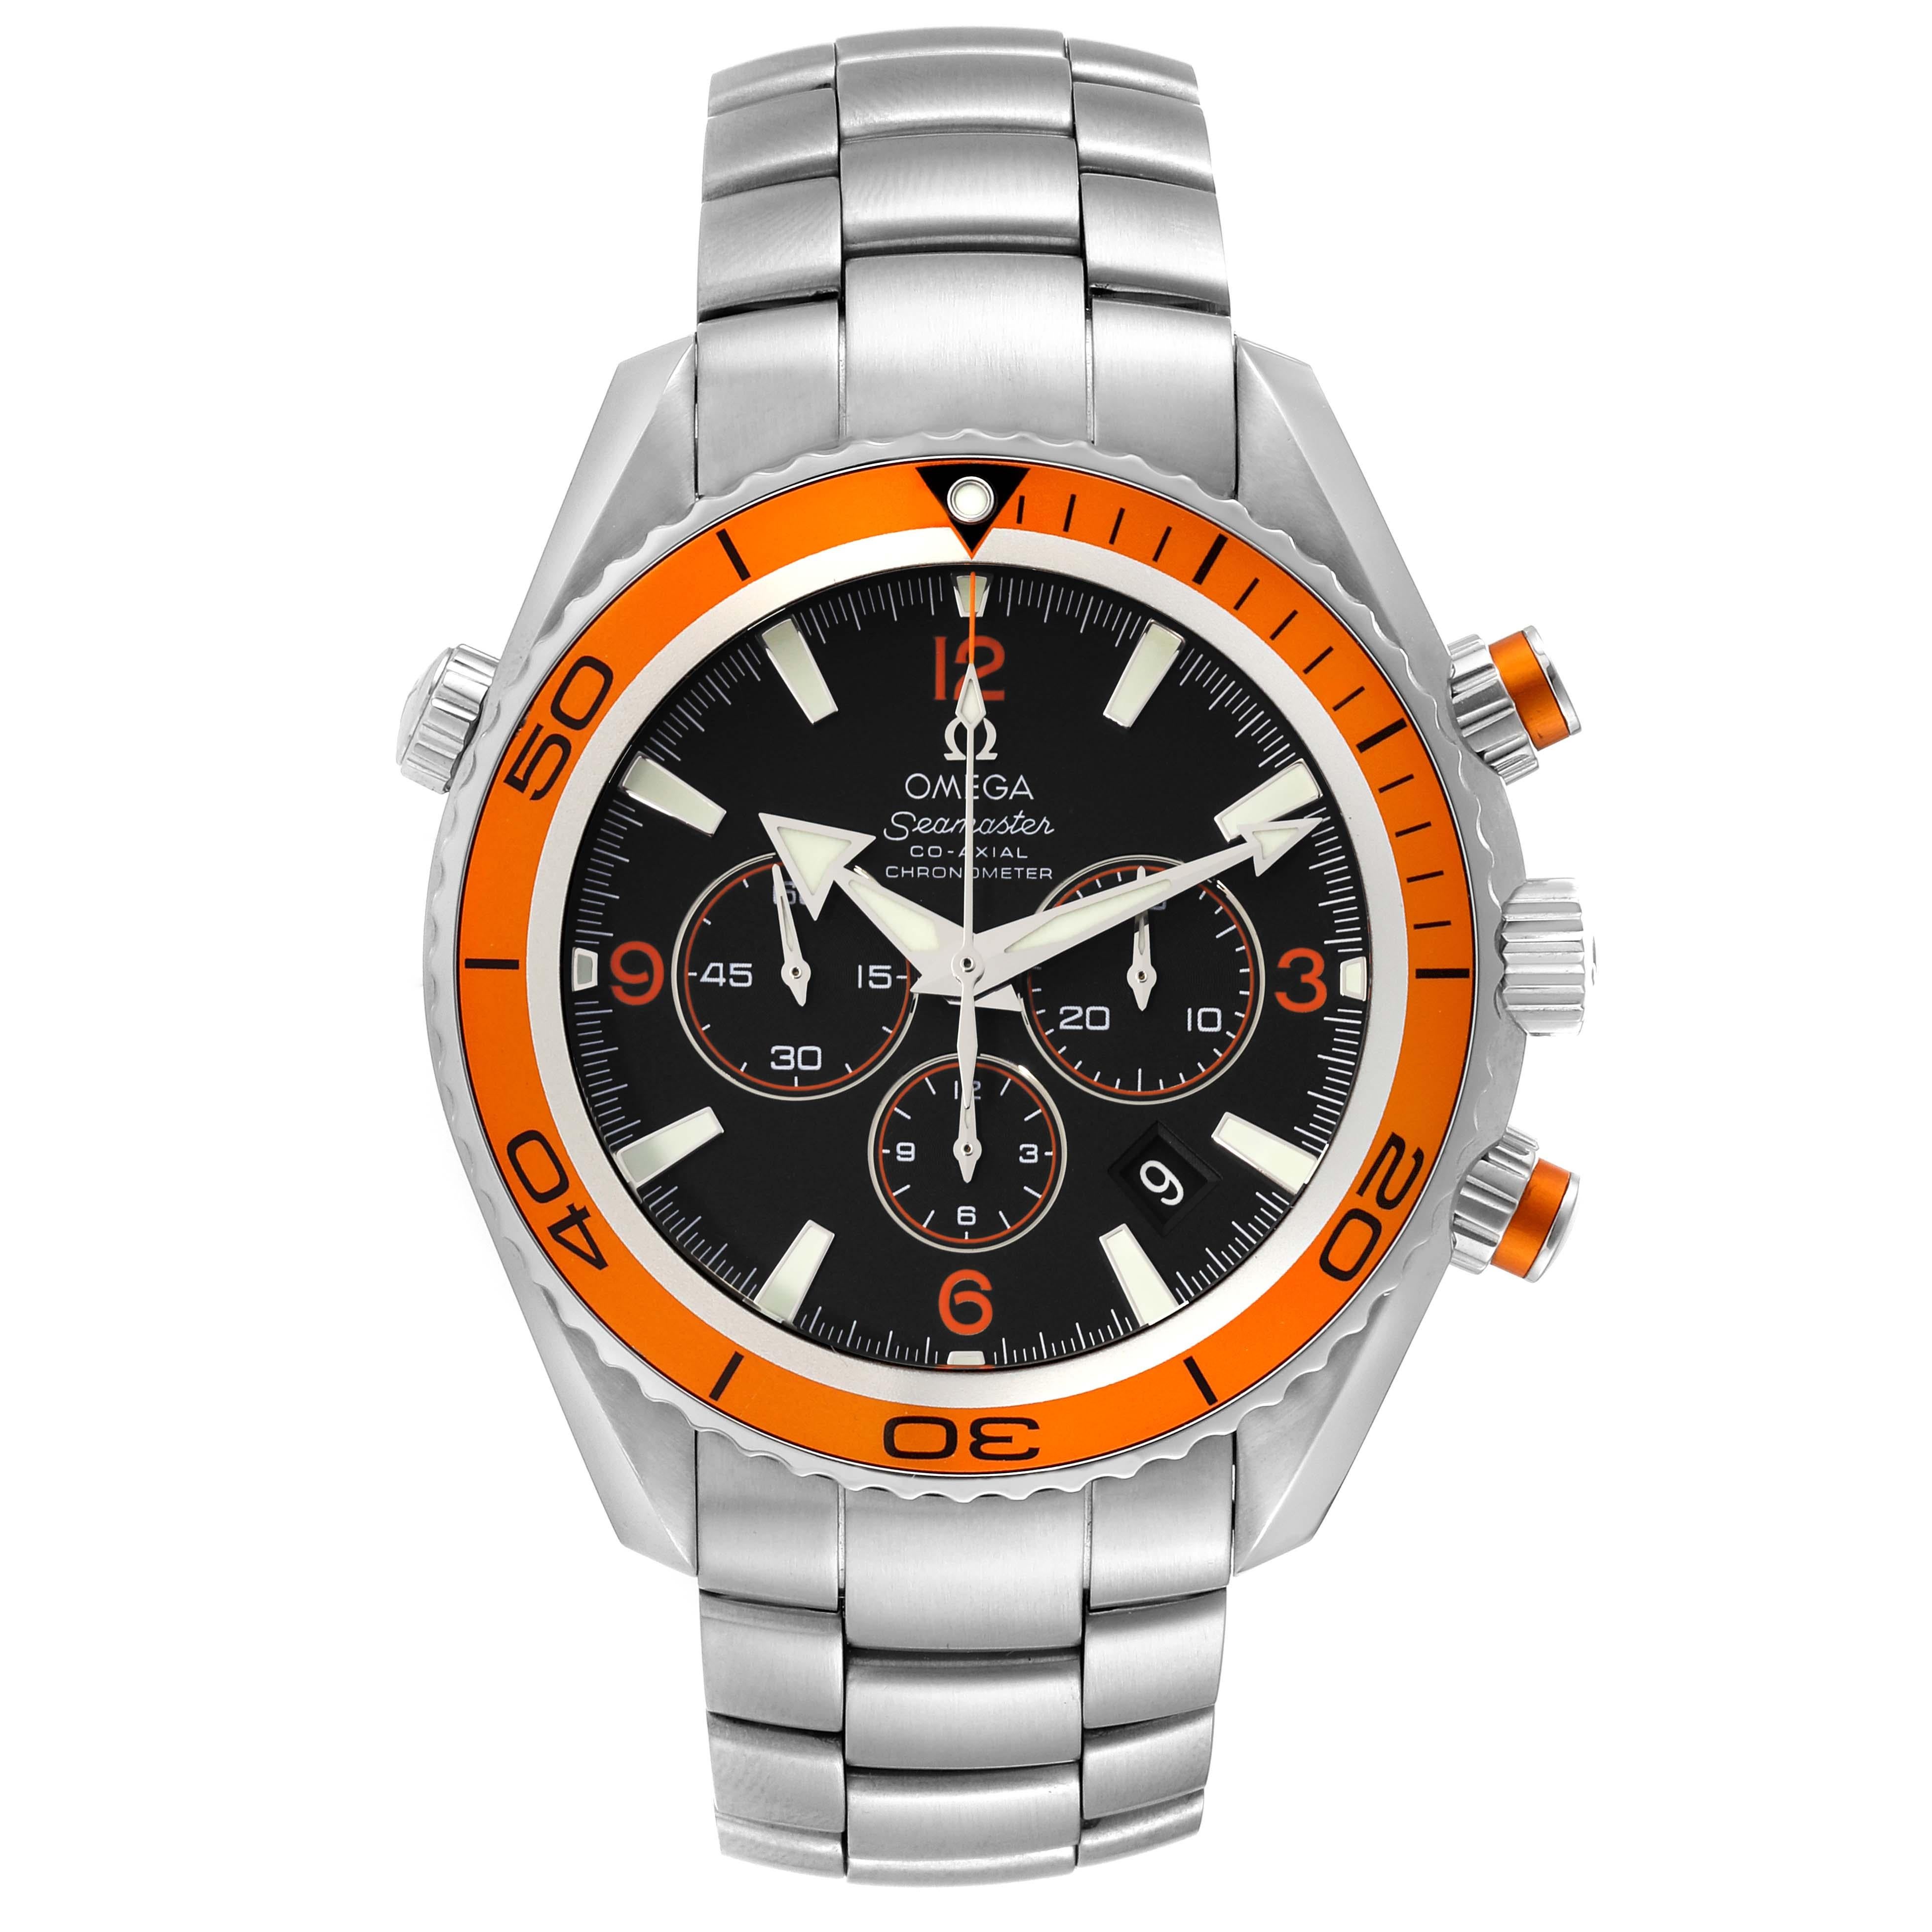 Omega Seamaster Planet Ocean XL Chrono Mens Watch 2218.50.00 Box Card. Automatic self-winding chronograph - chronometer movement. Stainless steel round case 45.5 mm in diameter. Helium Escape Valve at the 10 o'clock position. Orange uni-directional